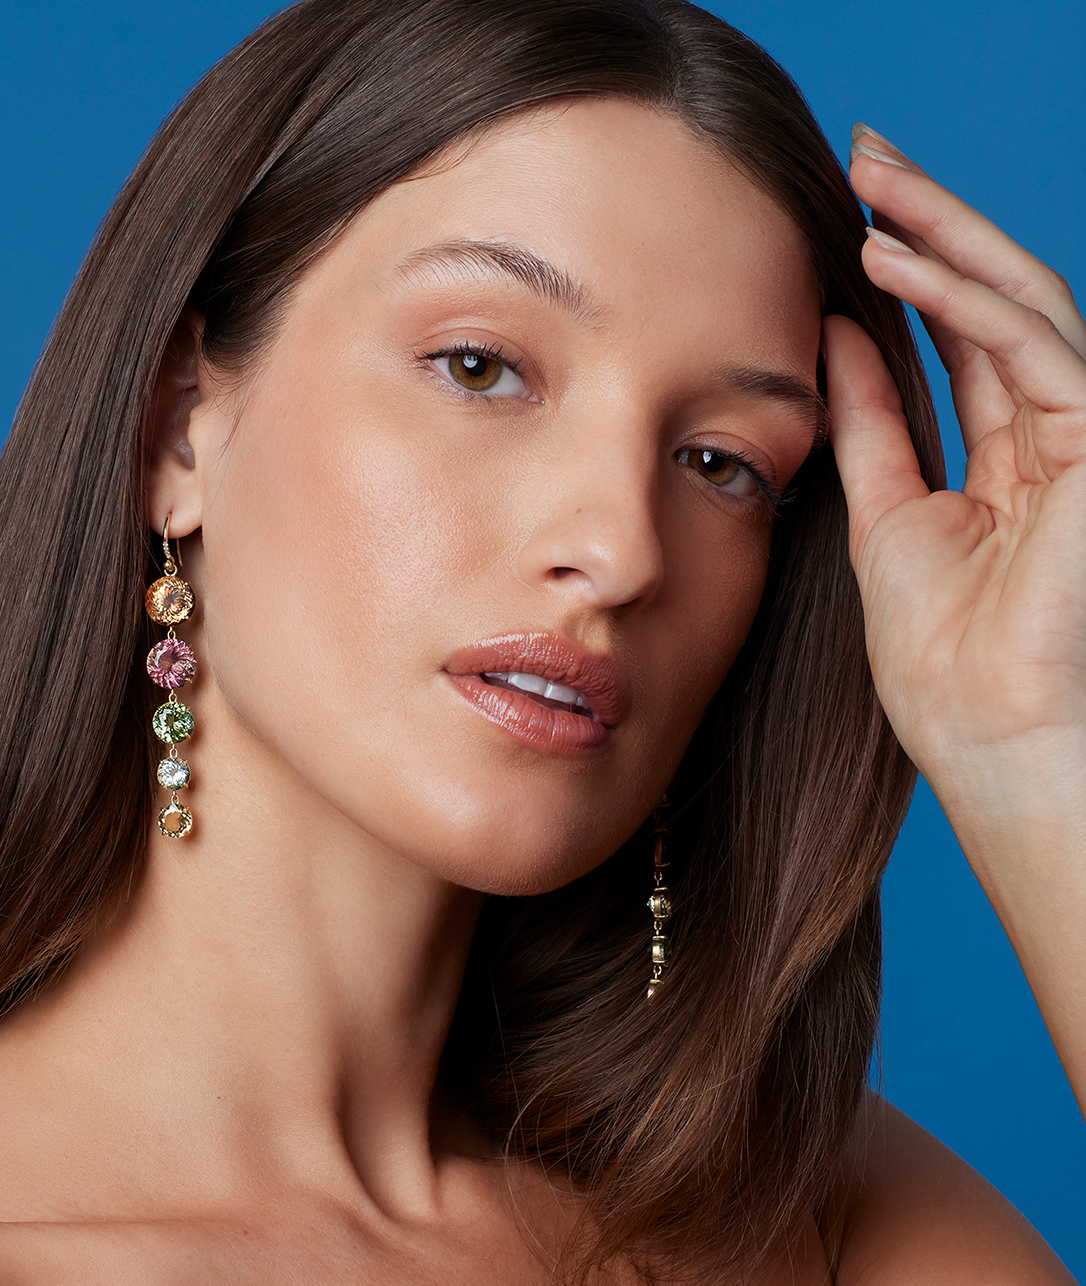 For those moments in life where too much feels just right, our Gemmy Gem Link Earrings will be there for you.SHOP NOW